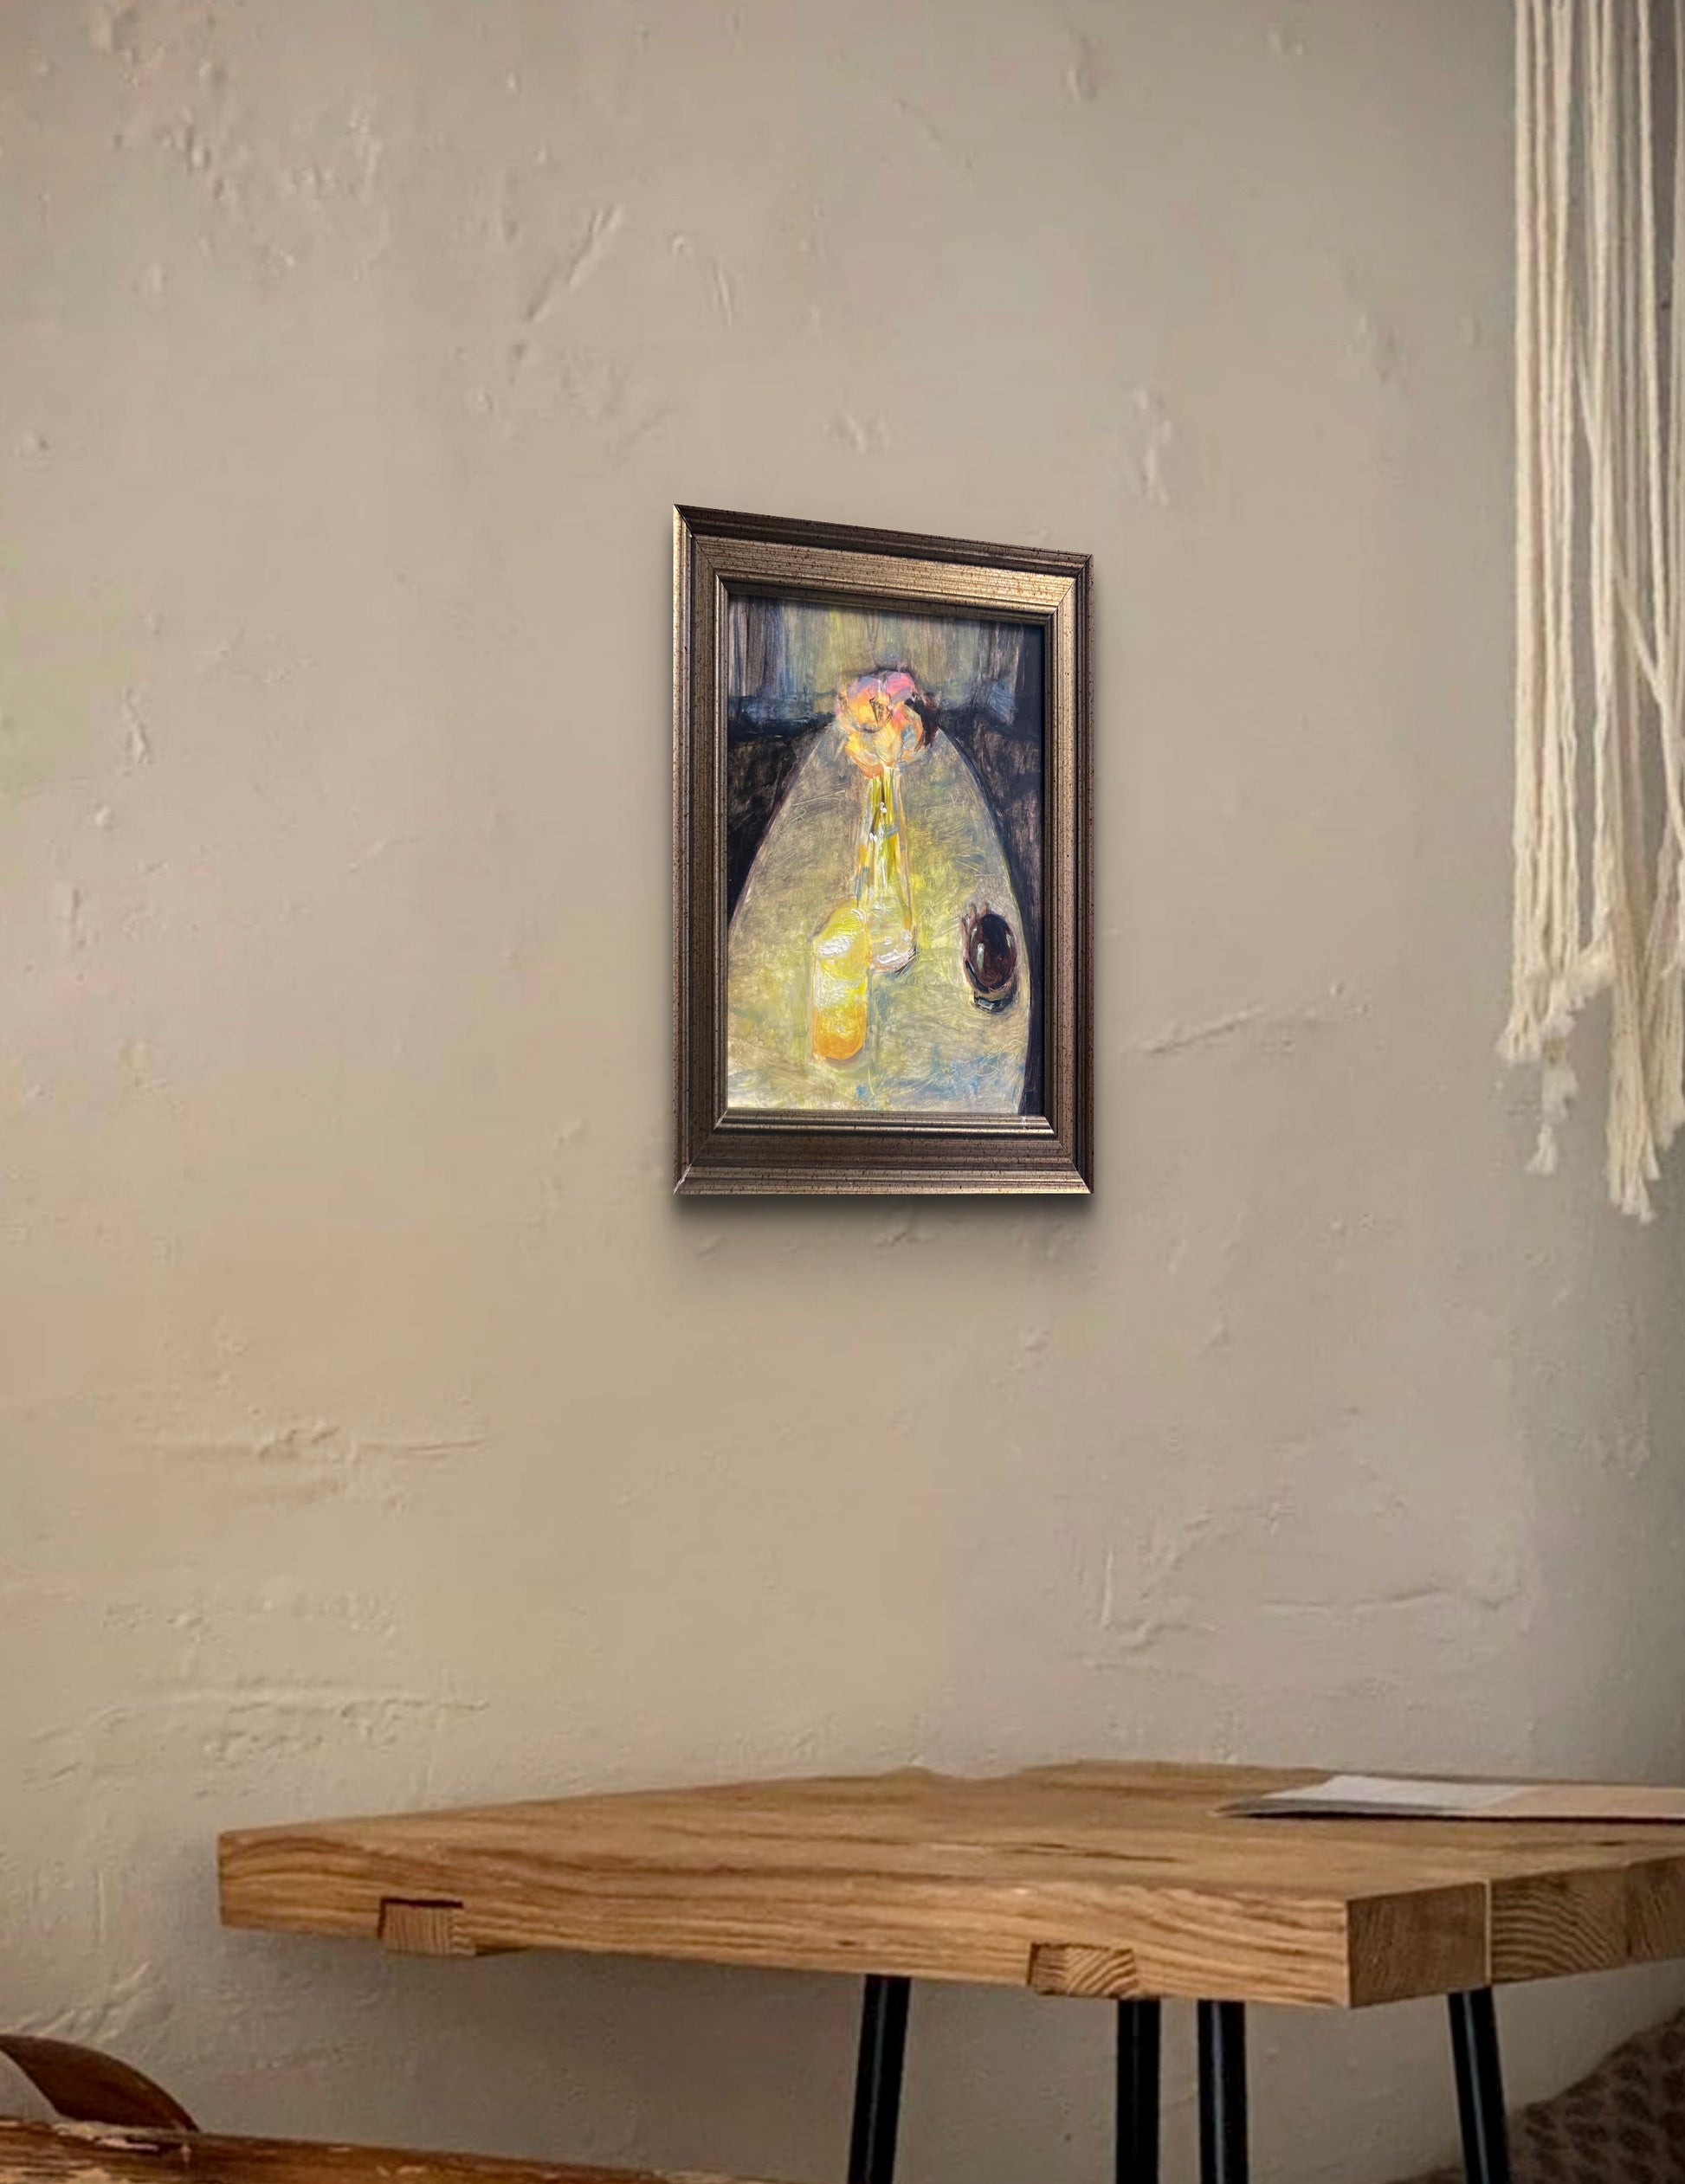 Oil painting of flowers in vase and drinks on table in yellow and gray shades titled 'Low Light' by E. E. Jacks in situ